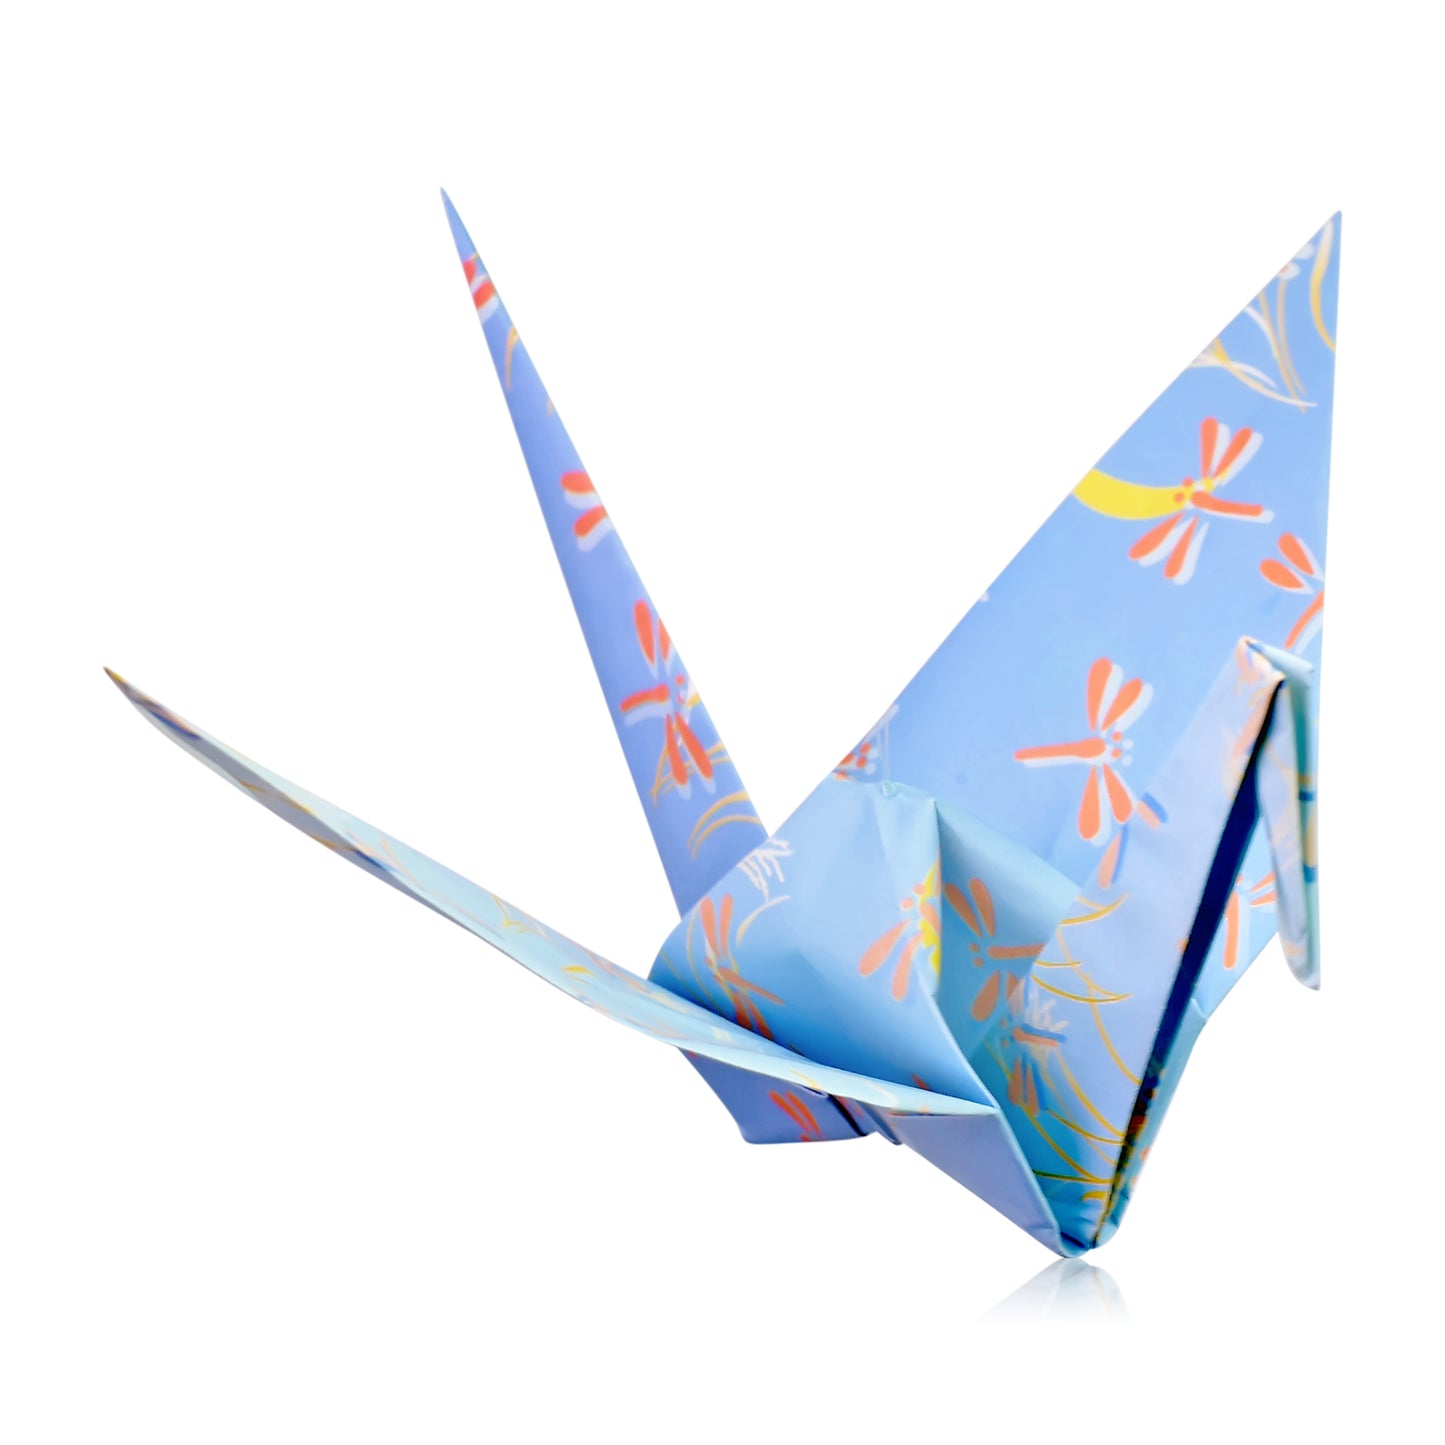 Show You Care with a Gift of April Diamond Birthstone & Origami Cranes